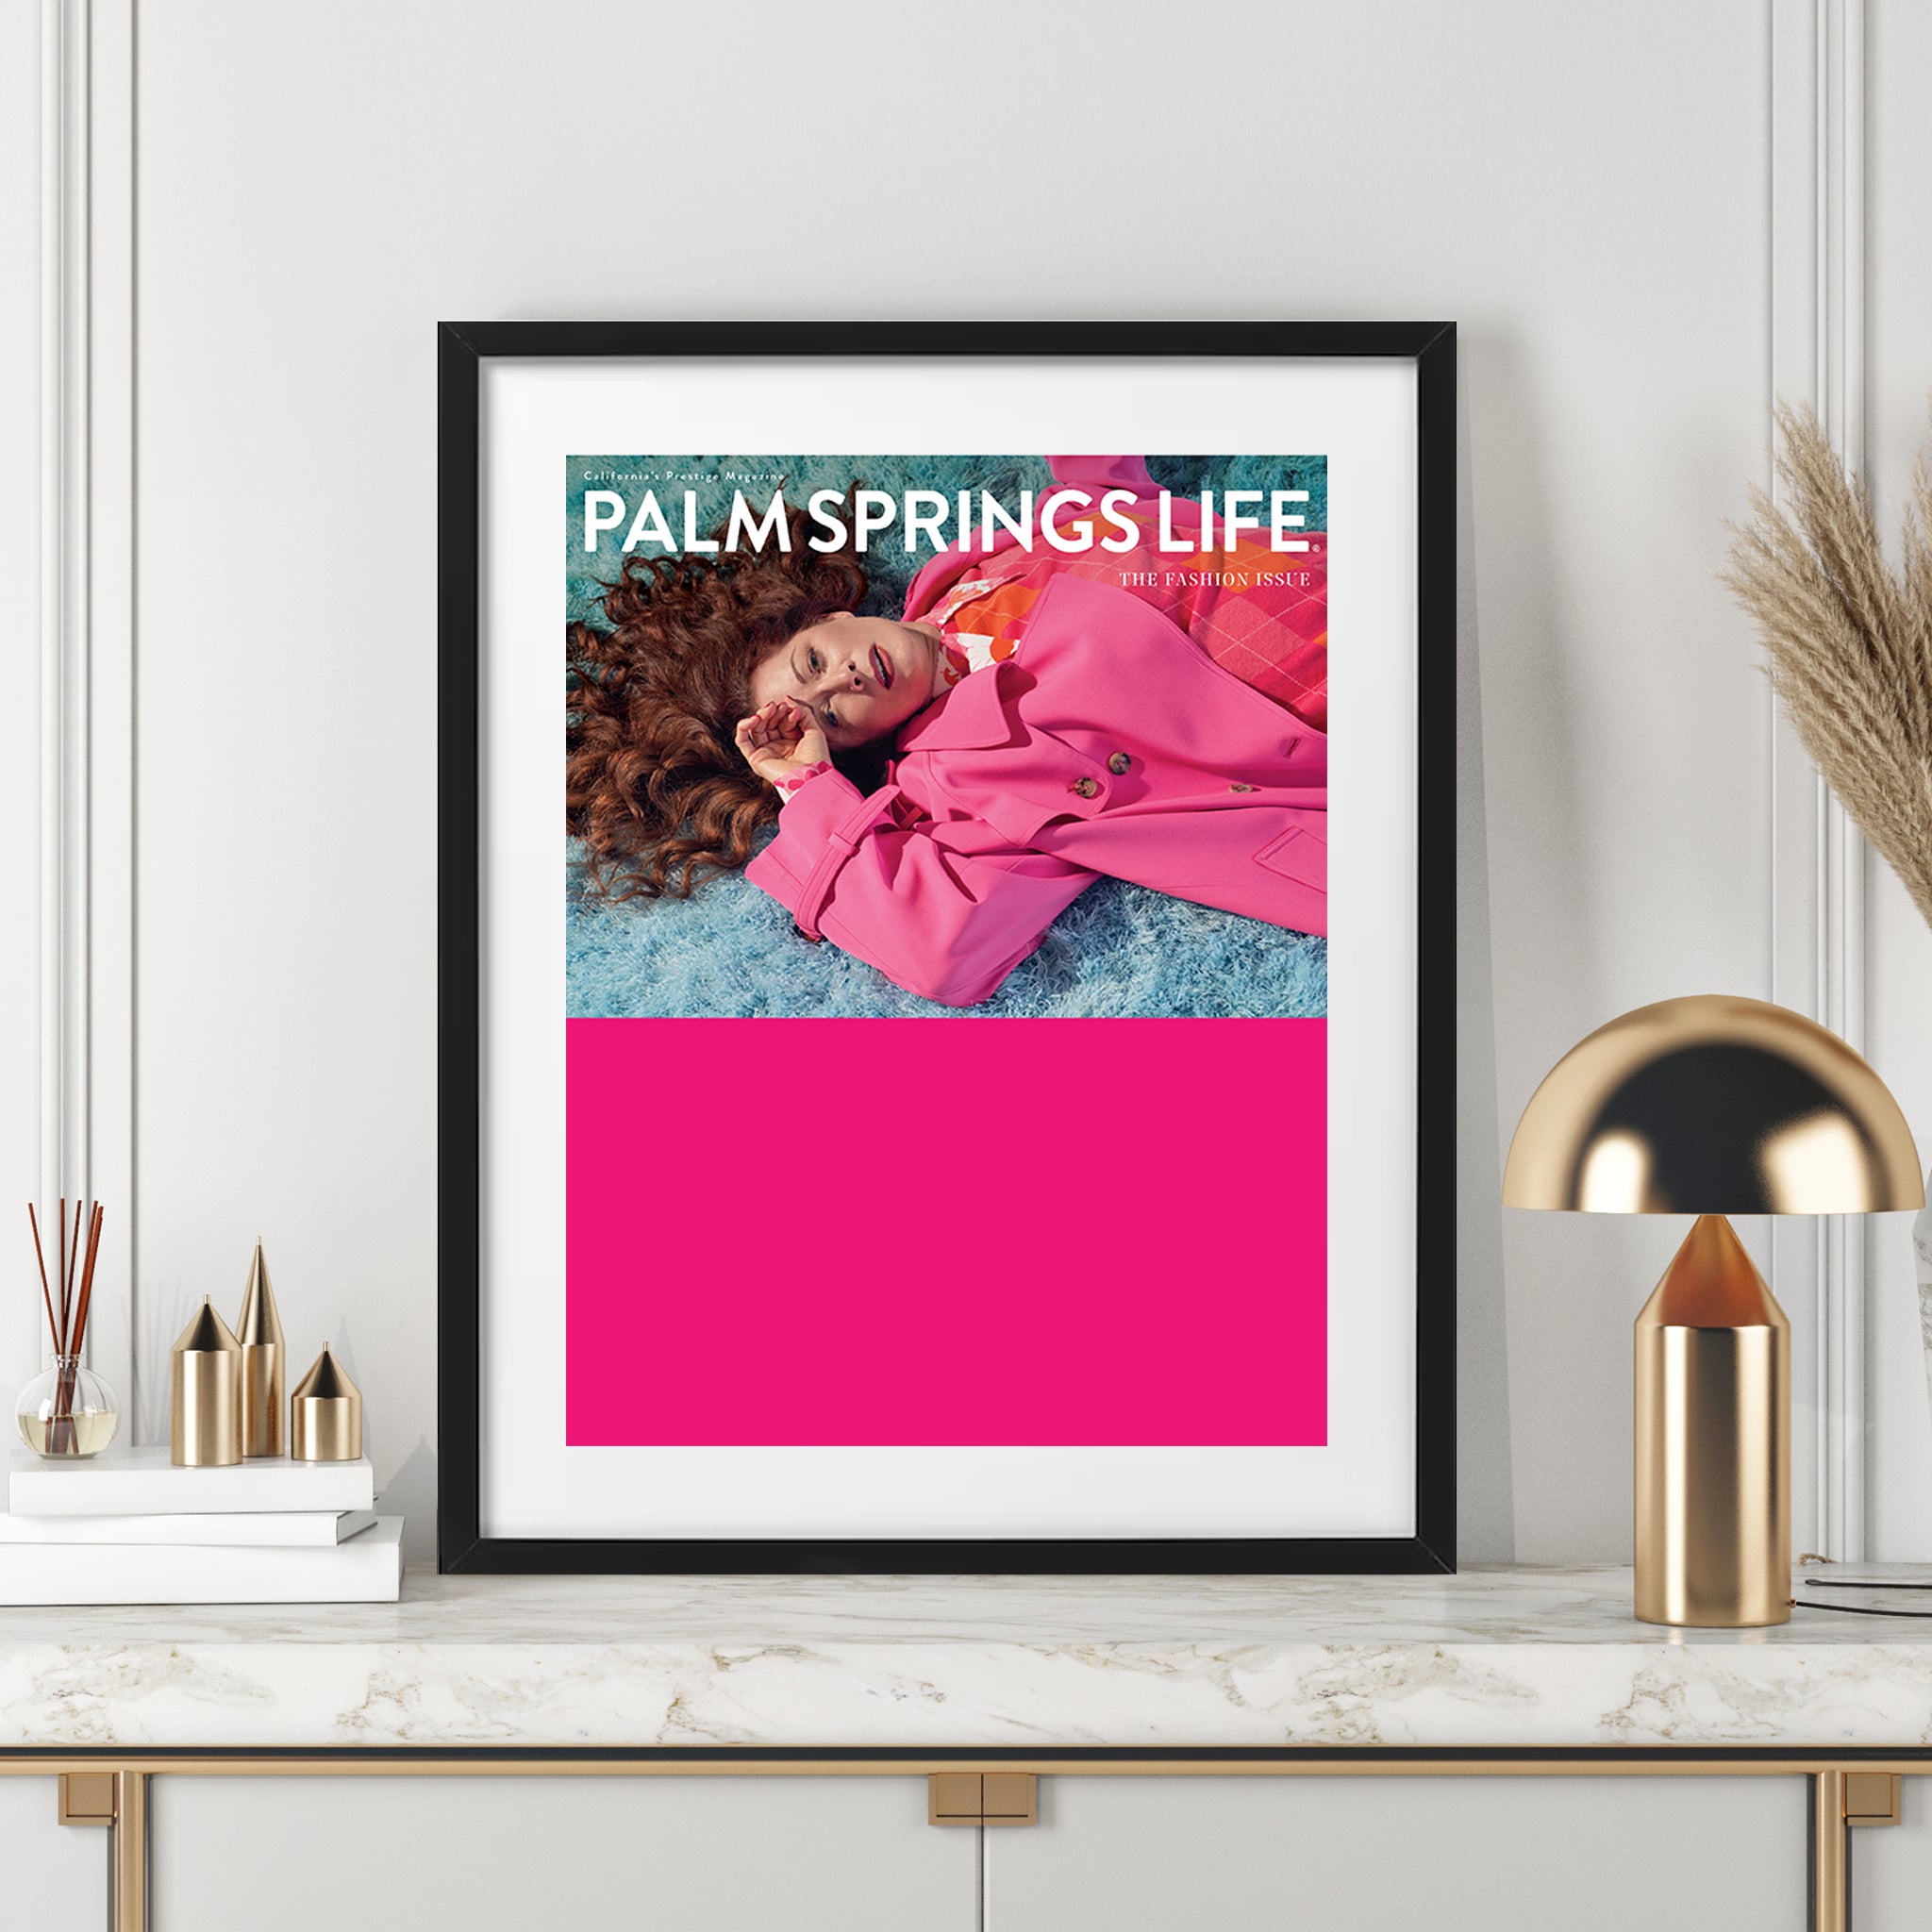 Palm Springs Life - March 2017 - Cover Poster